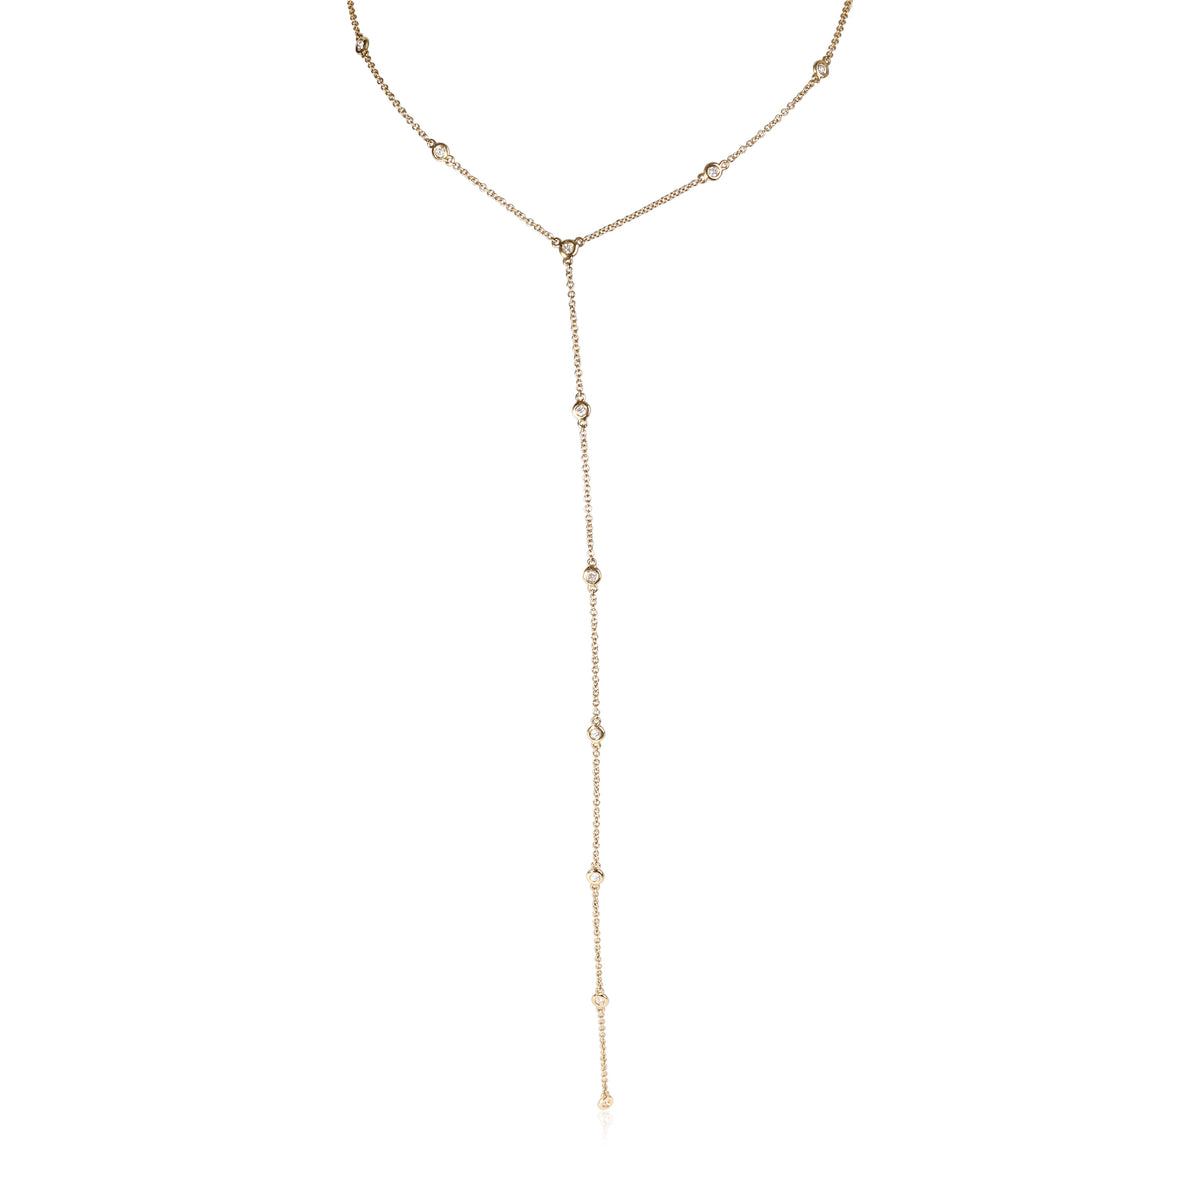 Diamond Station Lariat Necklace in 14K Yellow Gold in 14k Yellow Gold 0.15 CTW